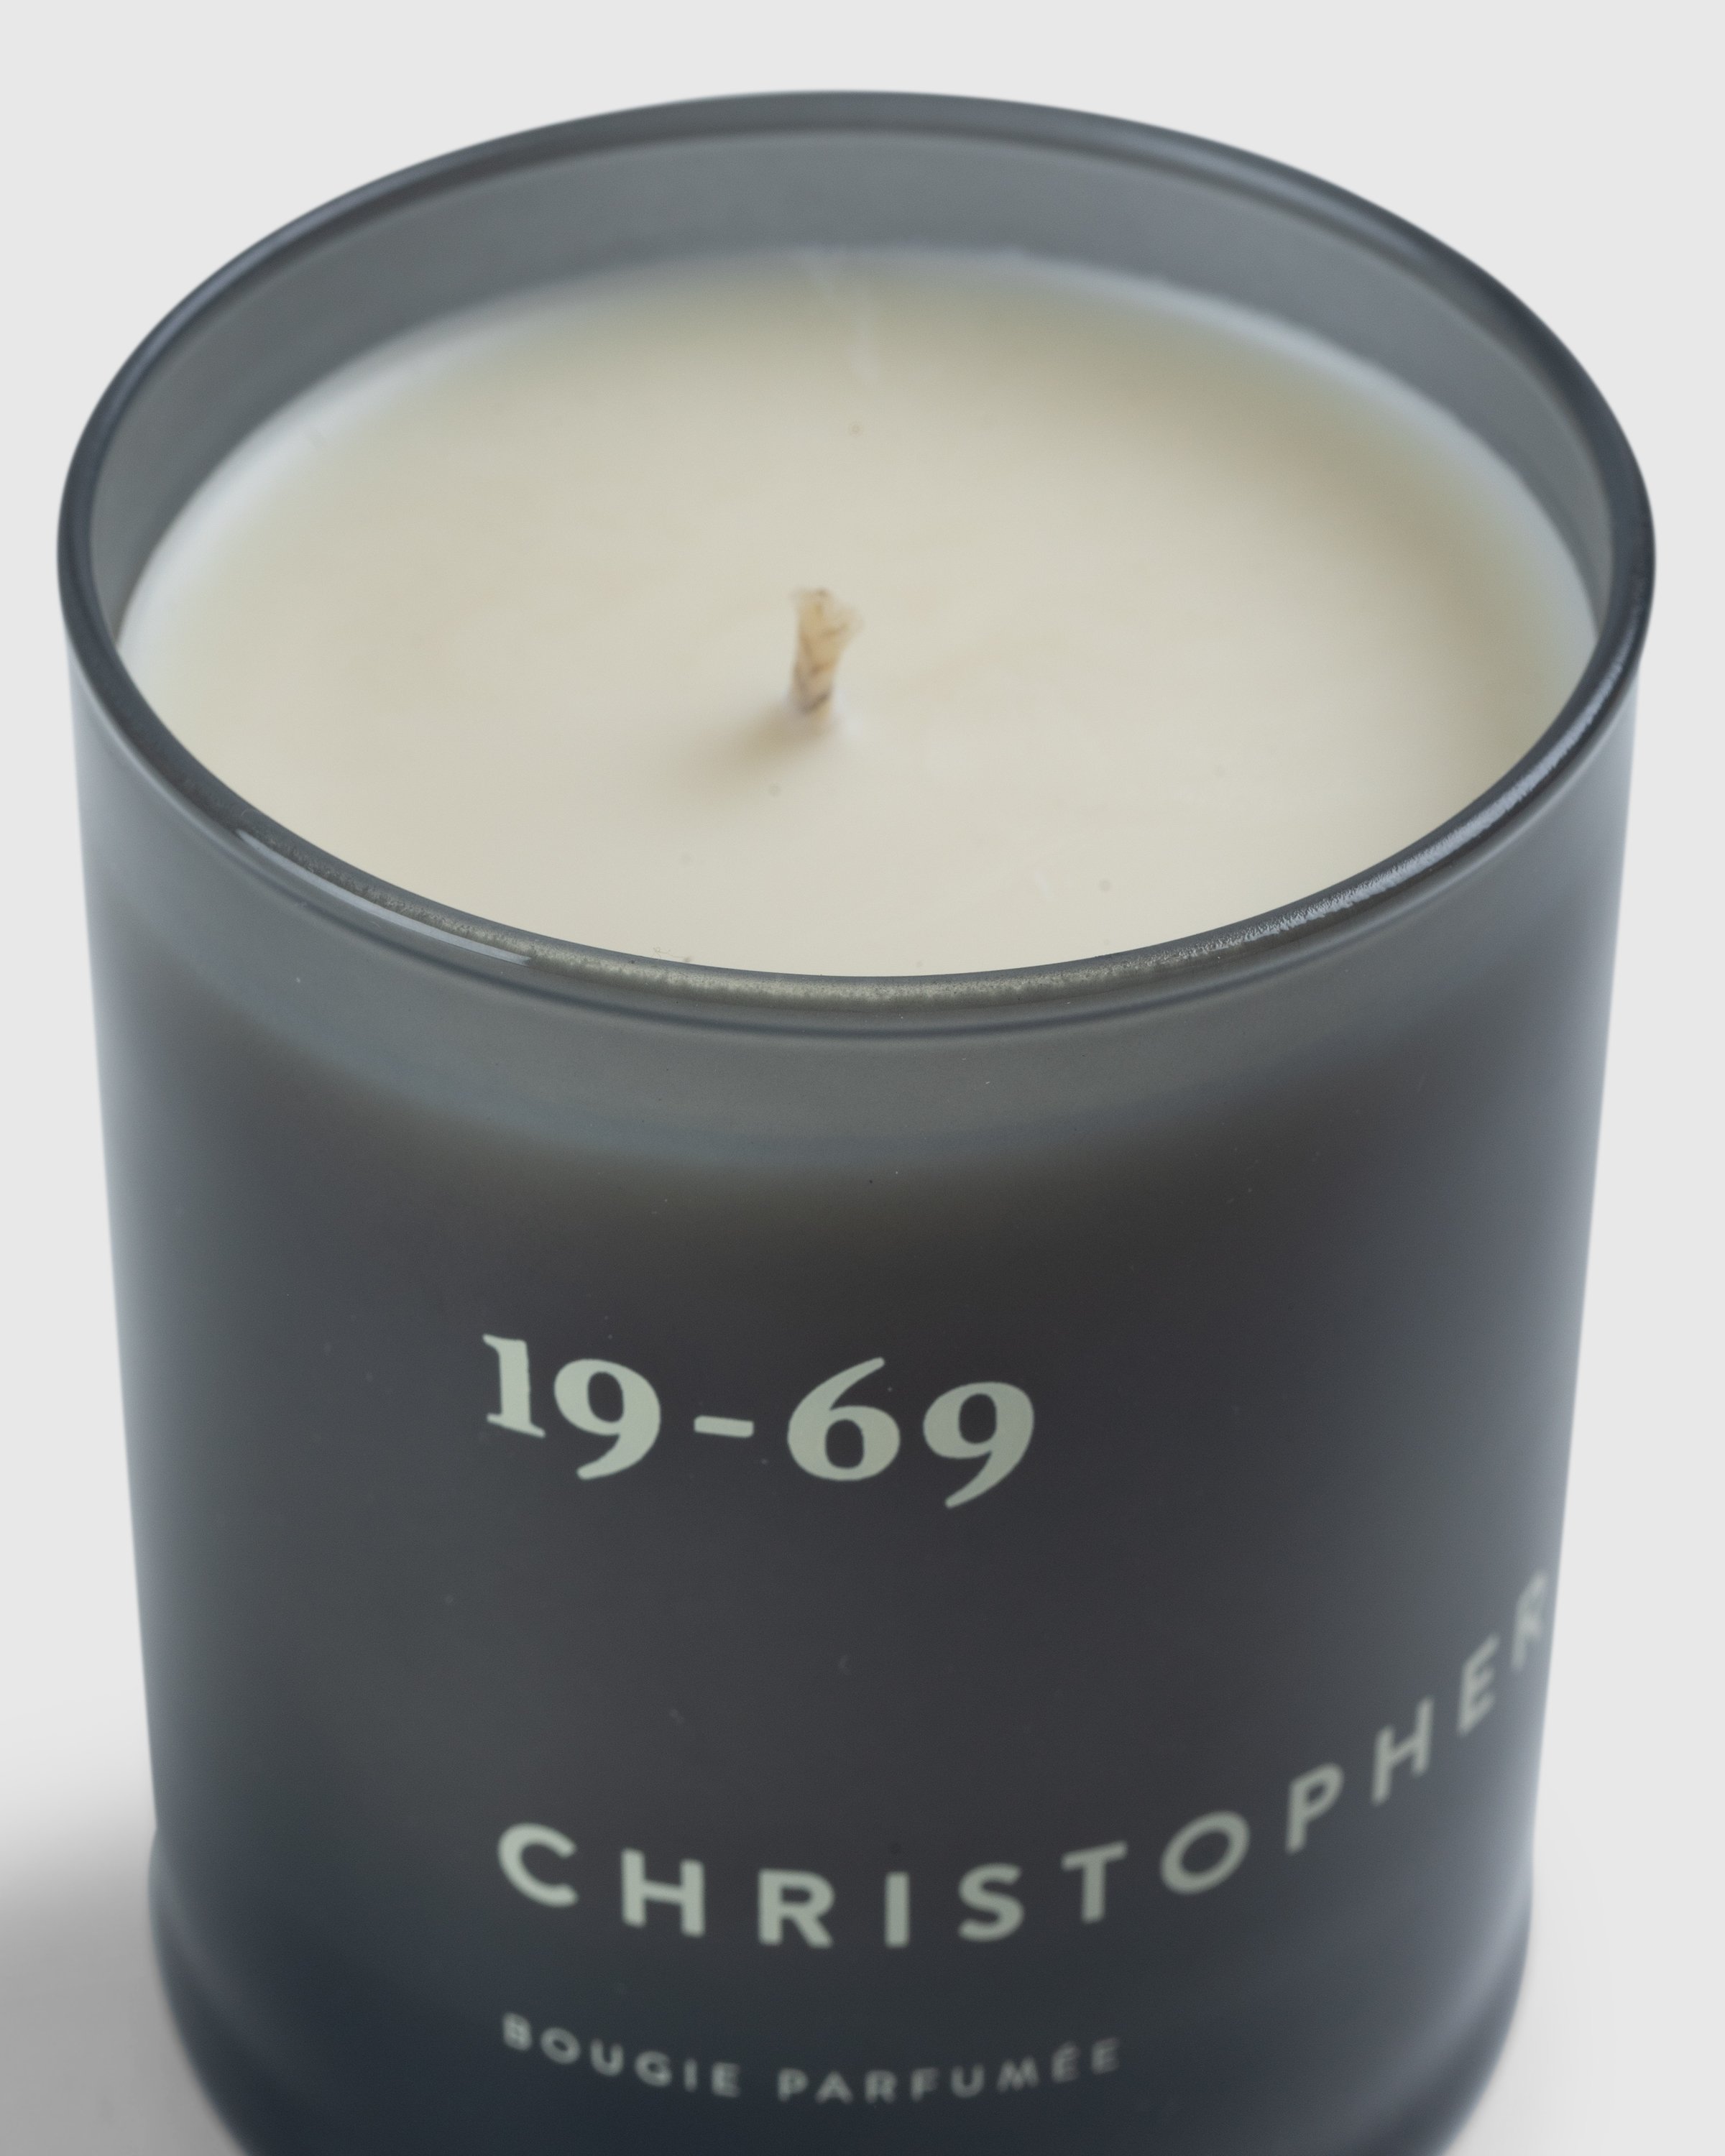 19-69 - Christopher BP Candle - Lifestyle - Grey - Image 3